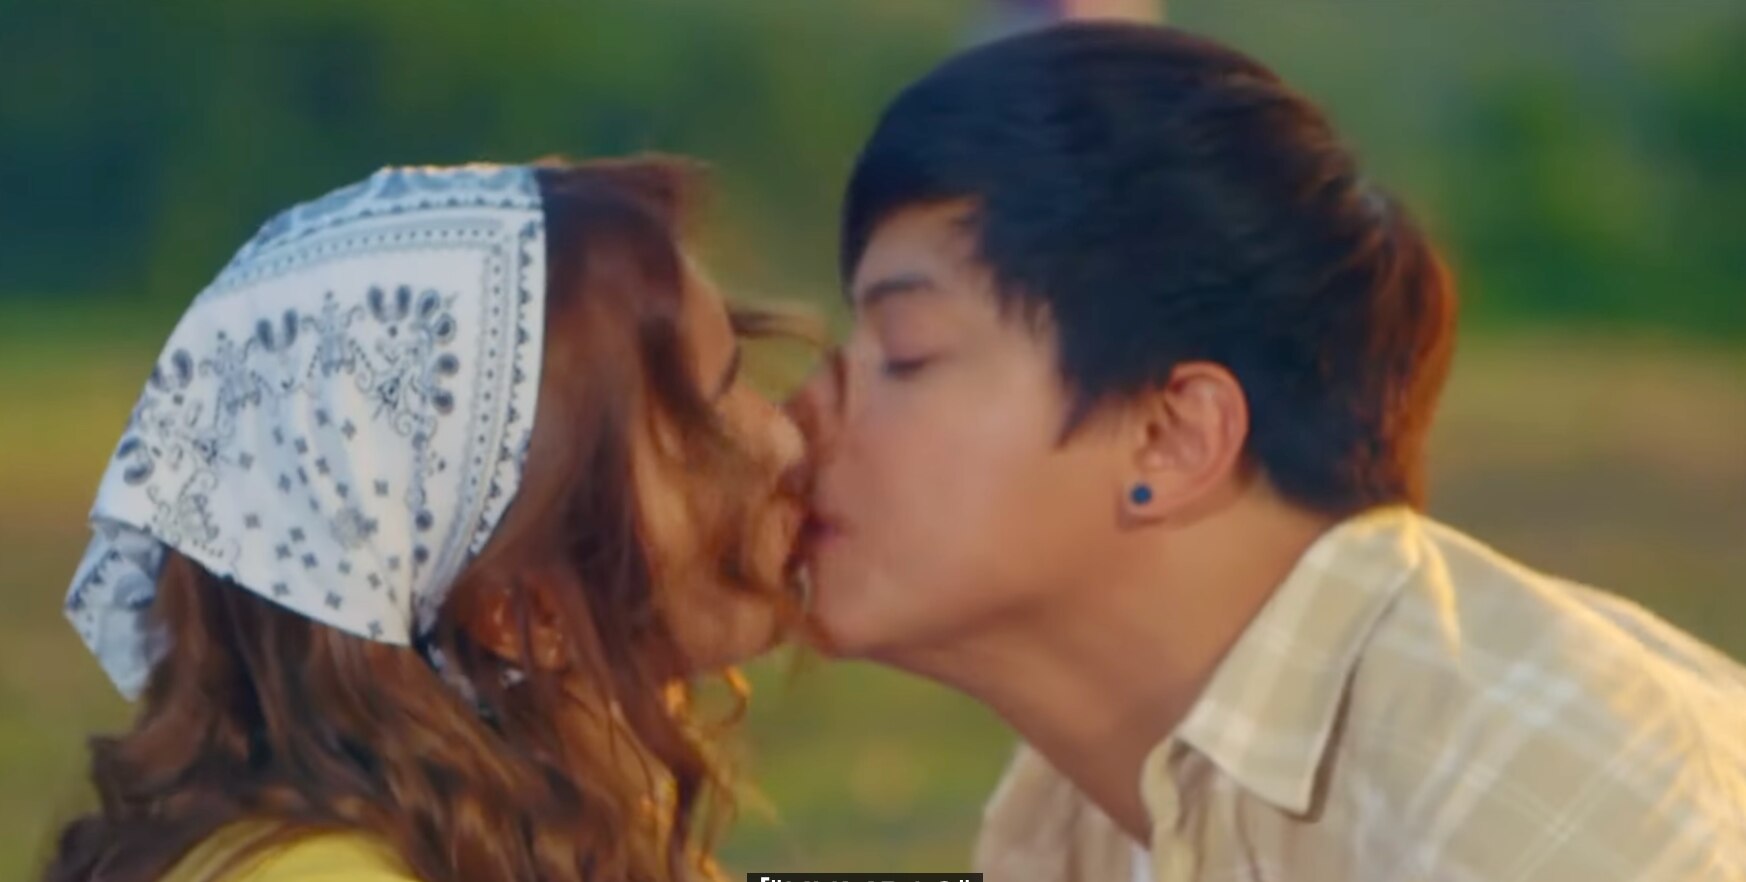 Kathryn and Daniel's first kiss in "2 Good 2 Be True," trends on Twitter